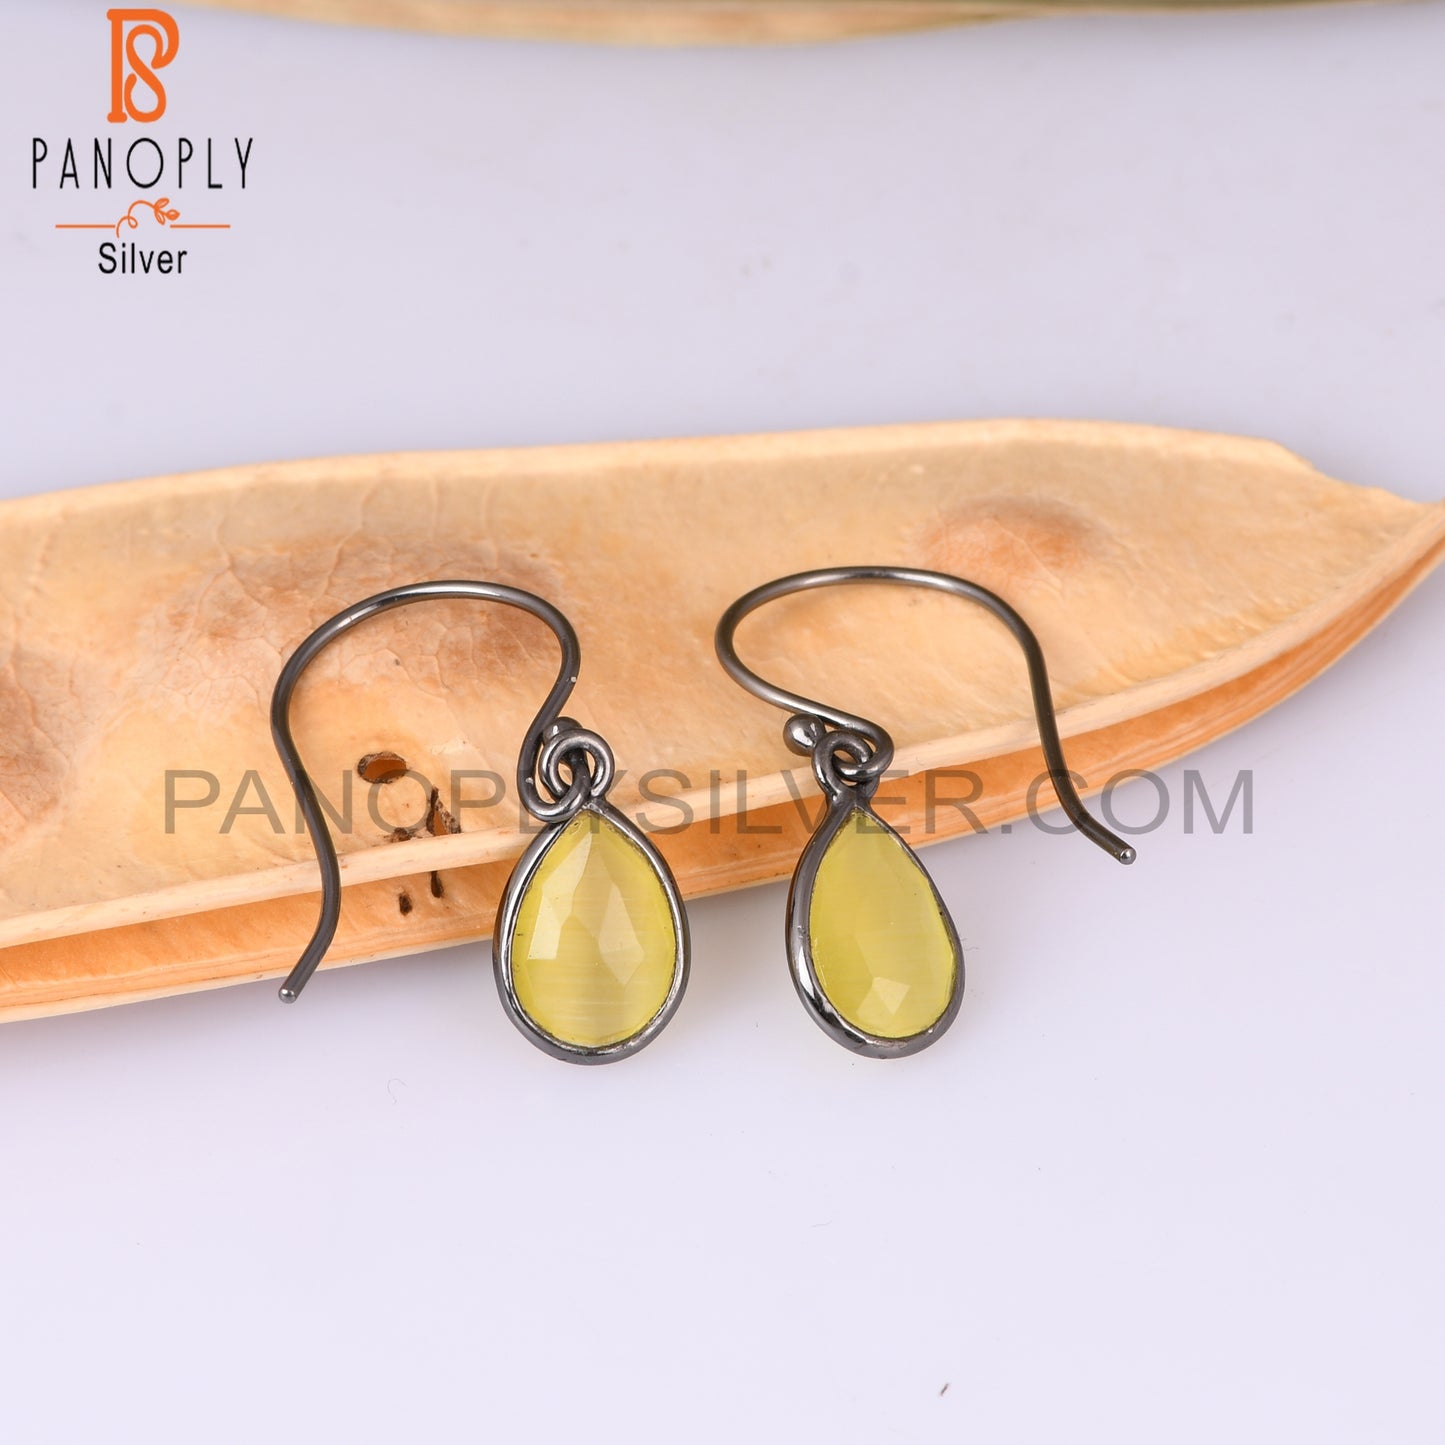 Moonstone Yellow Cultured Pear 925 Sterling Silver Earrings